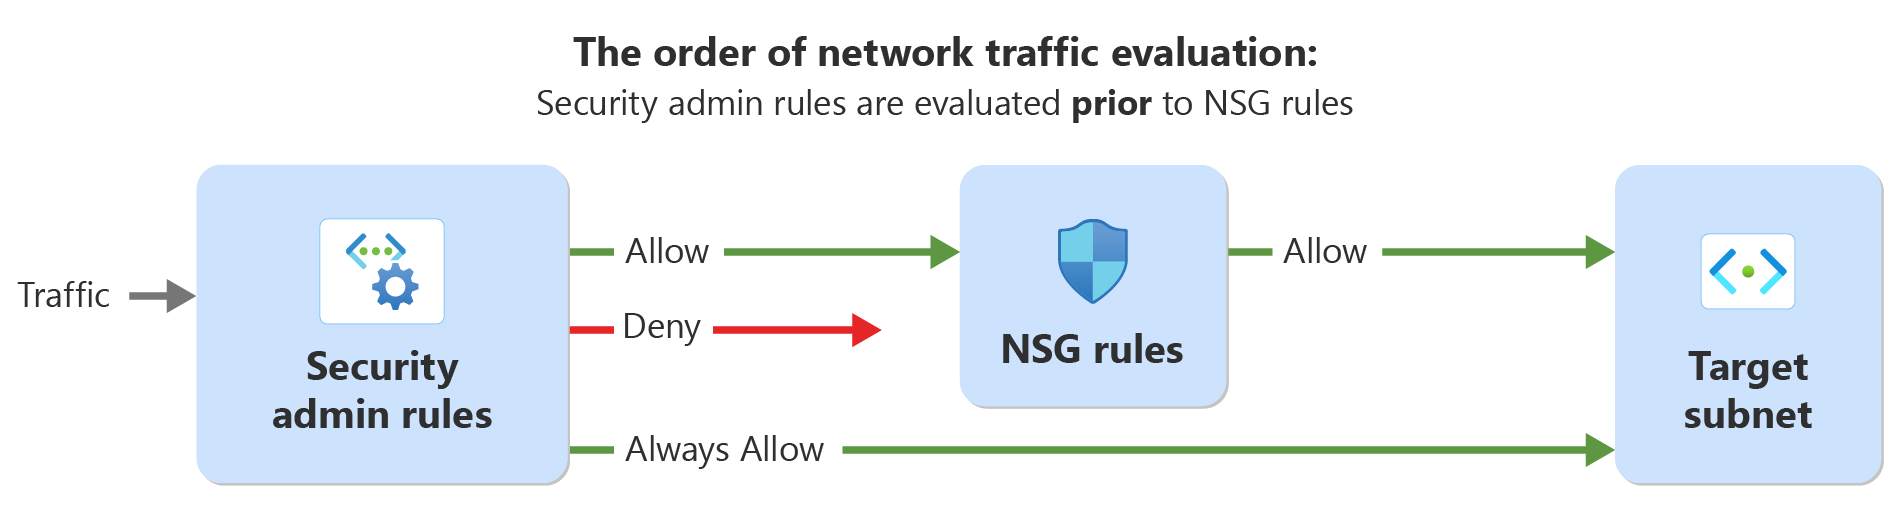 Diagram that shows the order of evaluation for network traffic with security admin rules and network security rules.